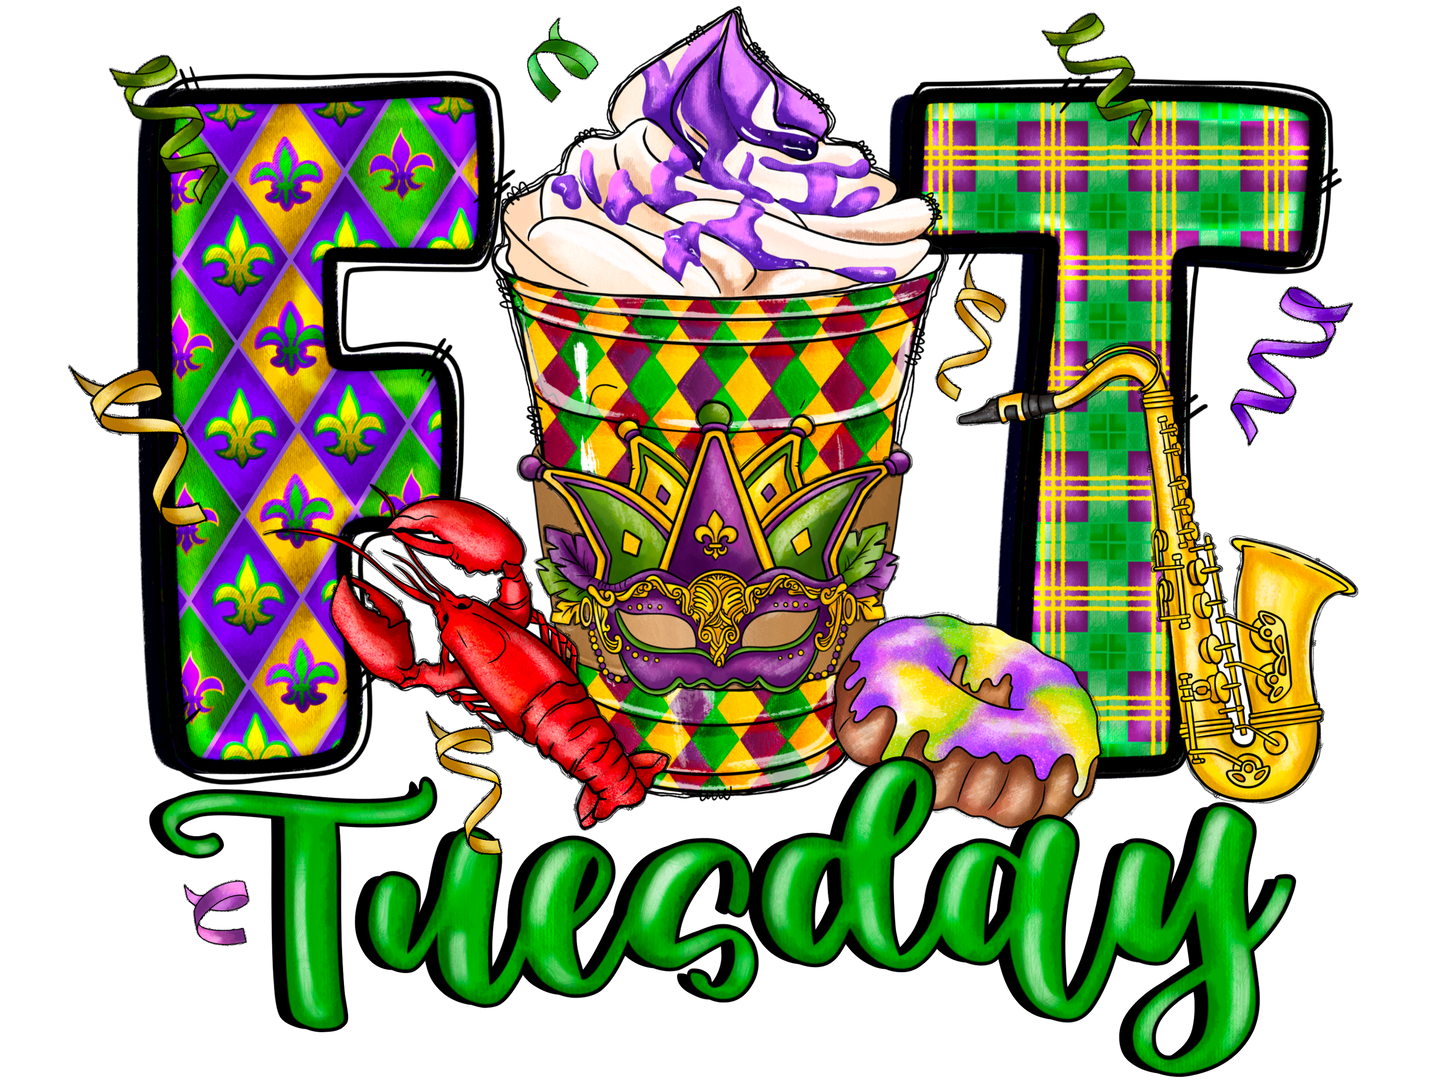 Fat Tuesday Group-CLICK TO SEE MORE IMAGES